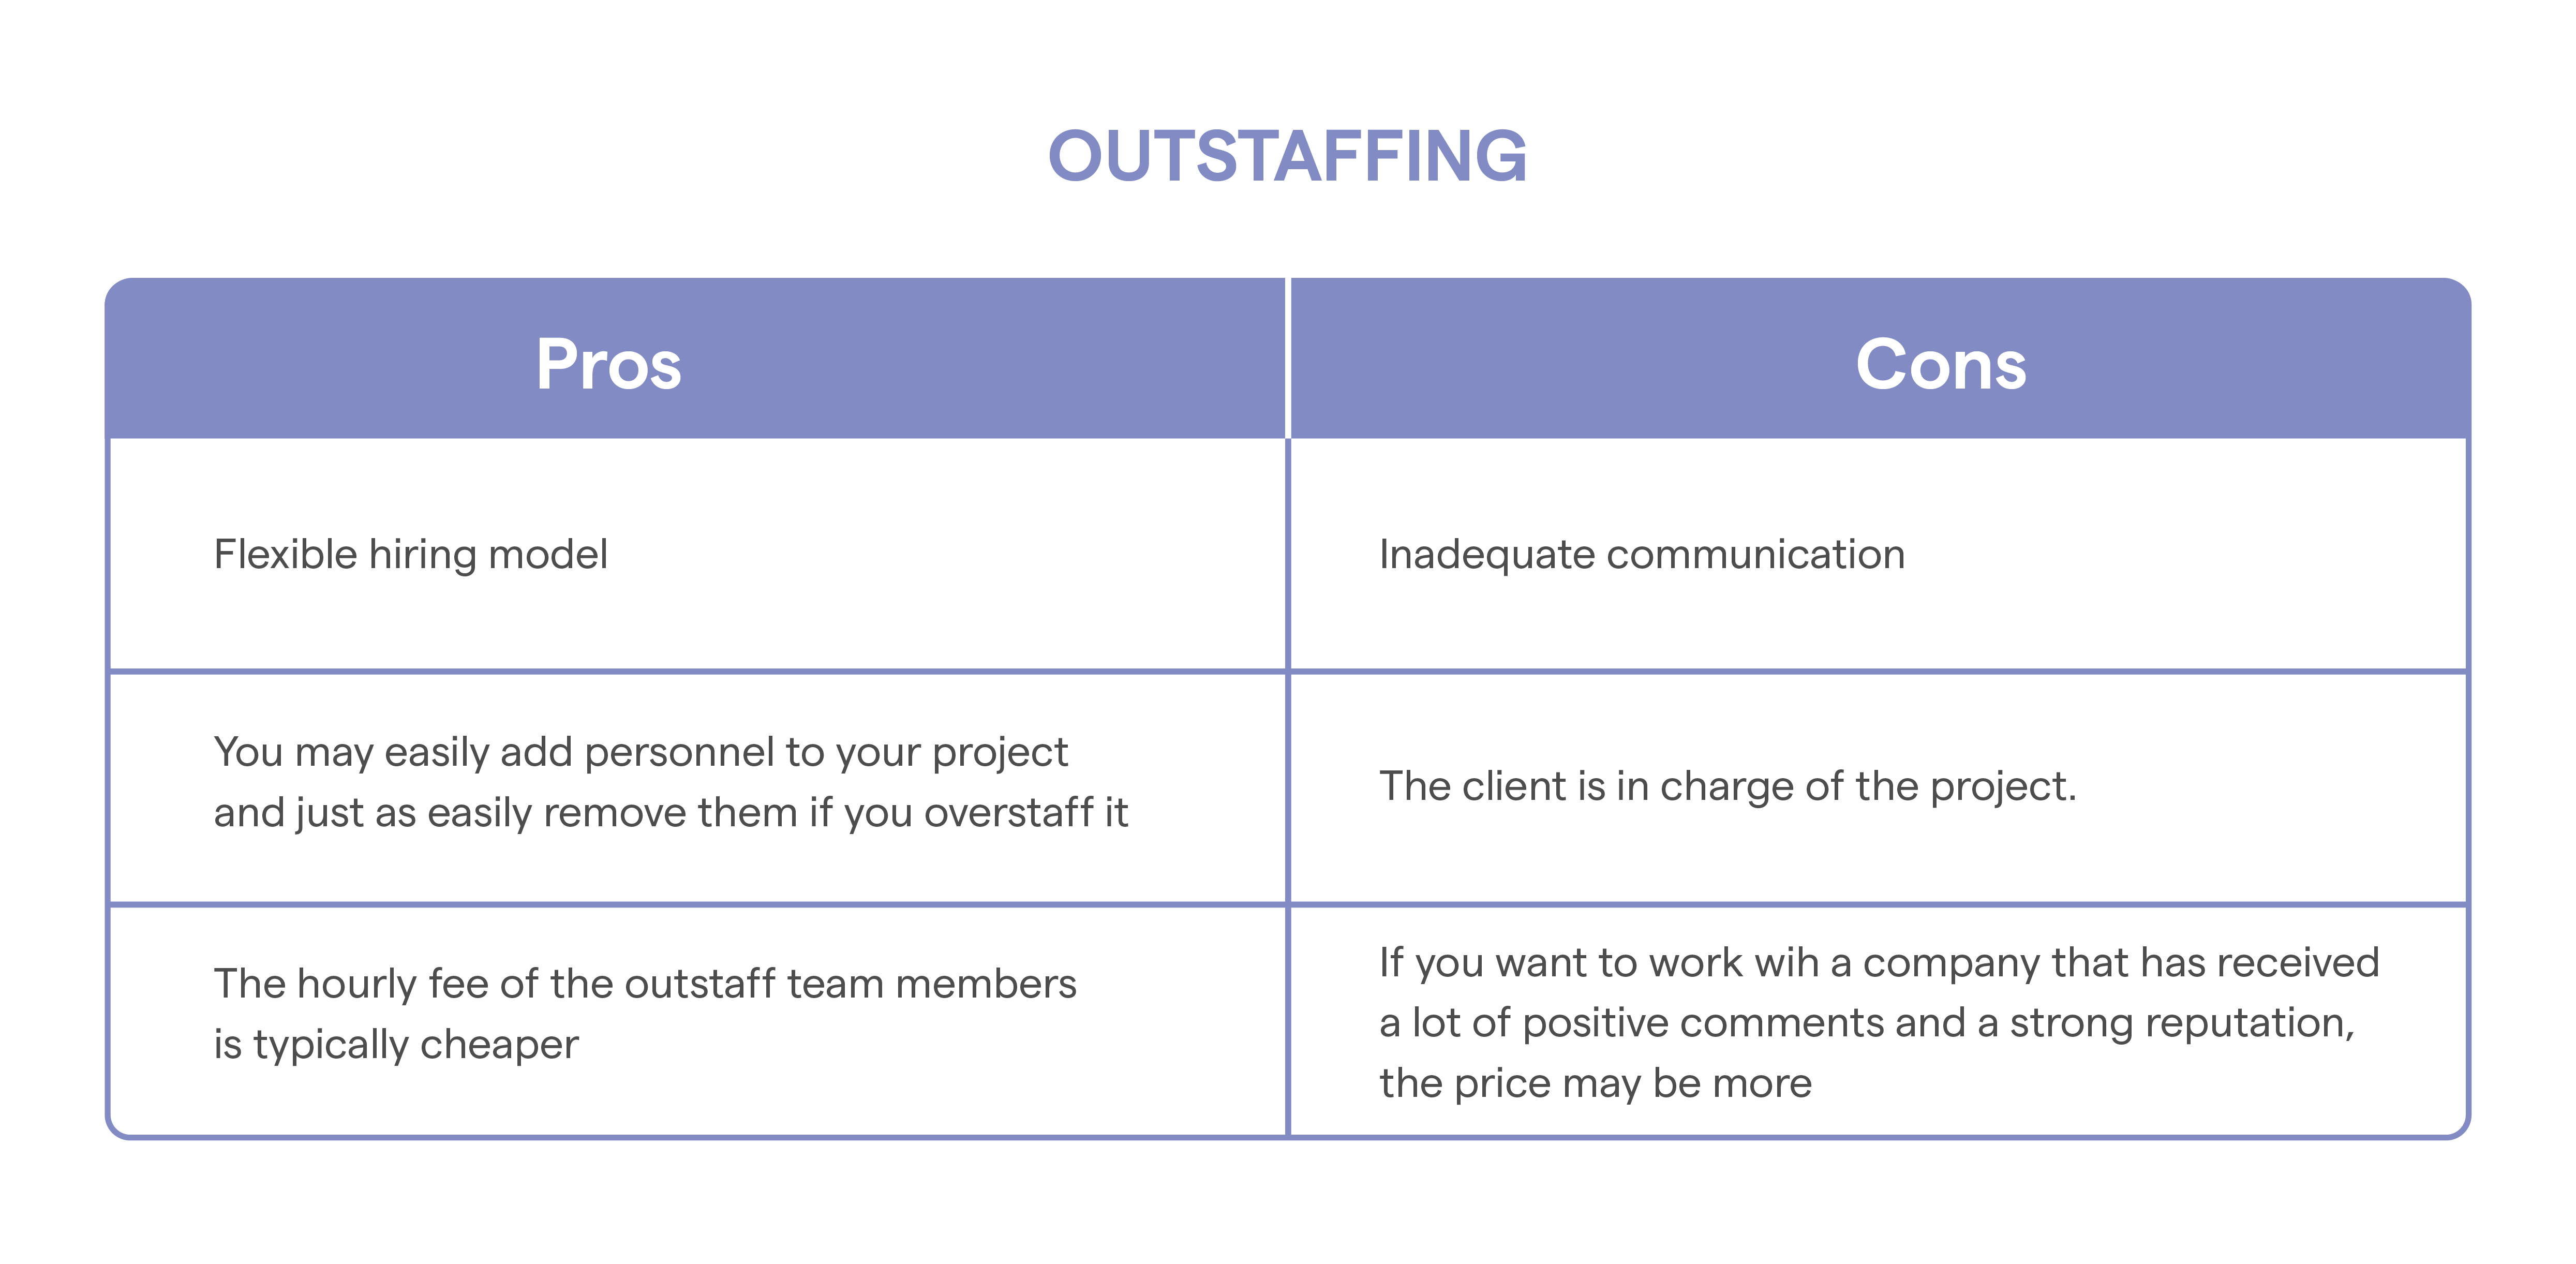 Pros and cons of Outstaffing